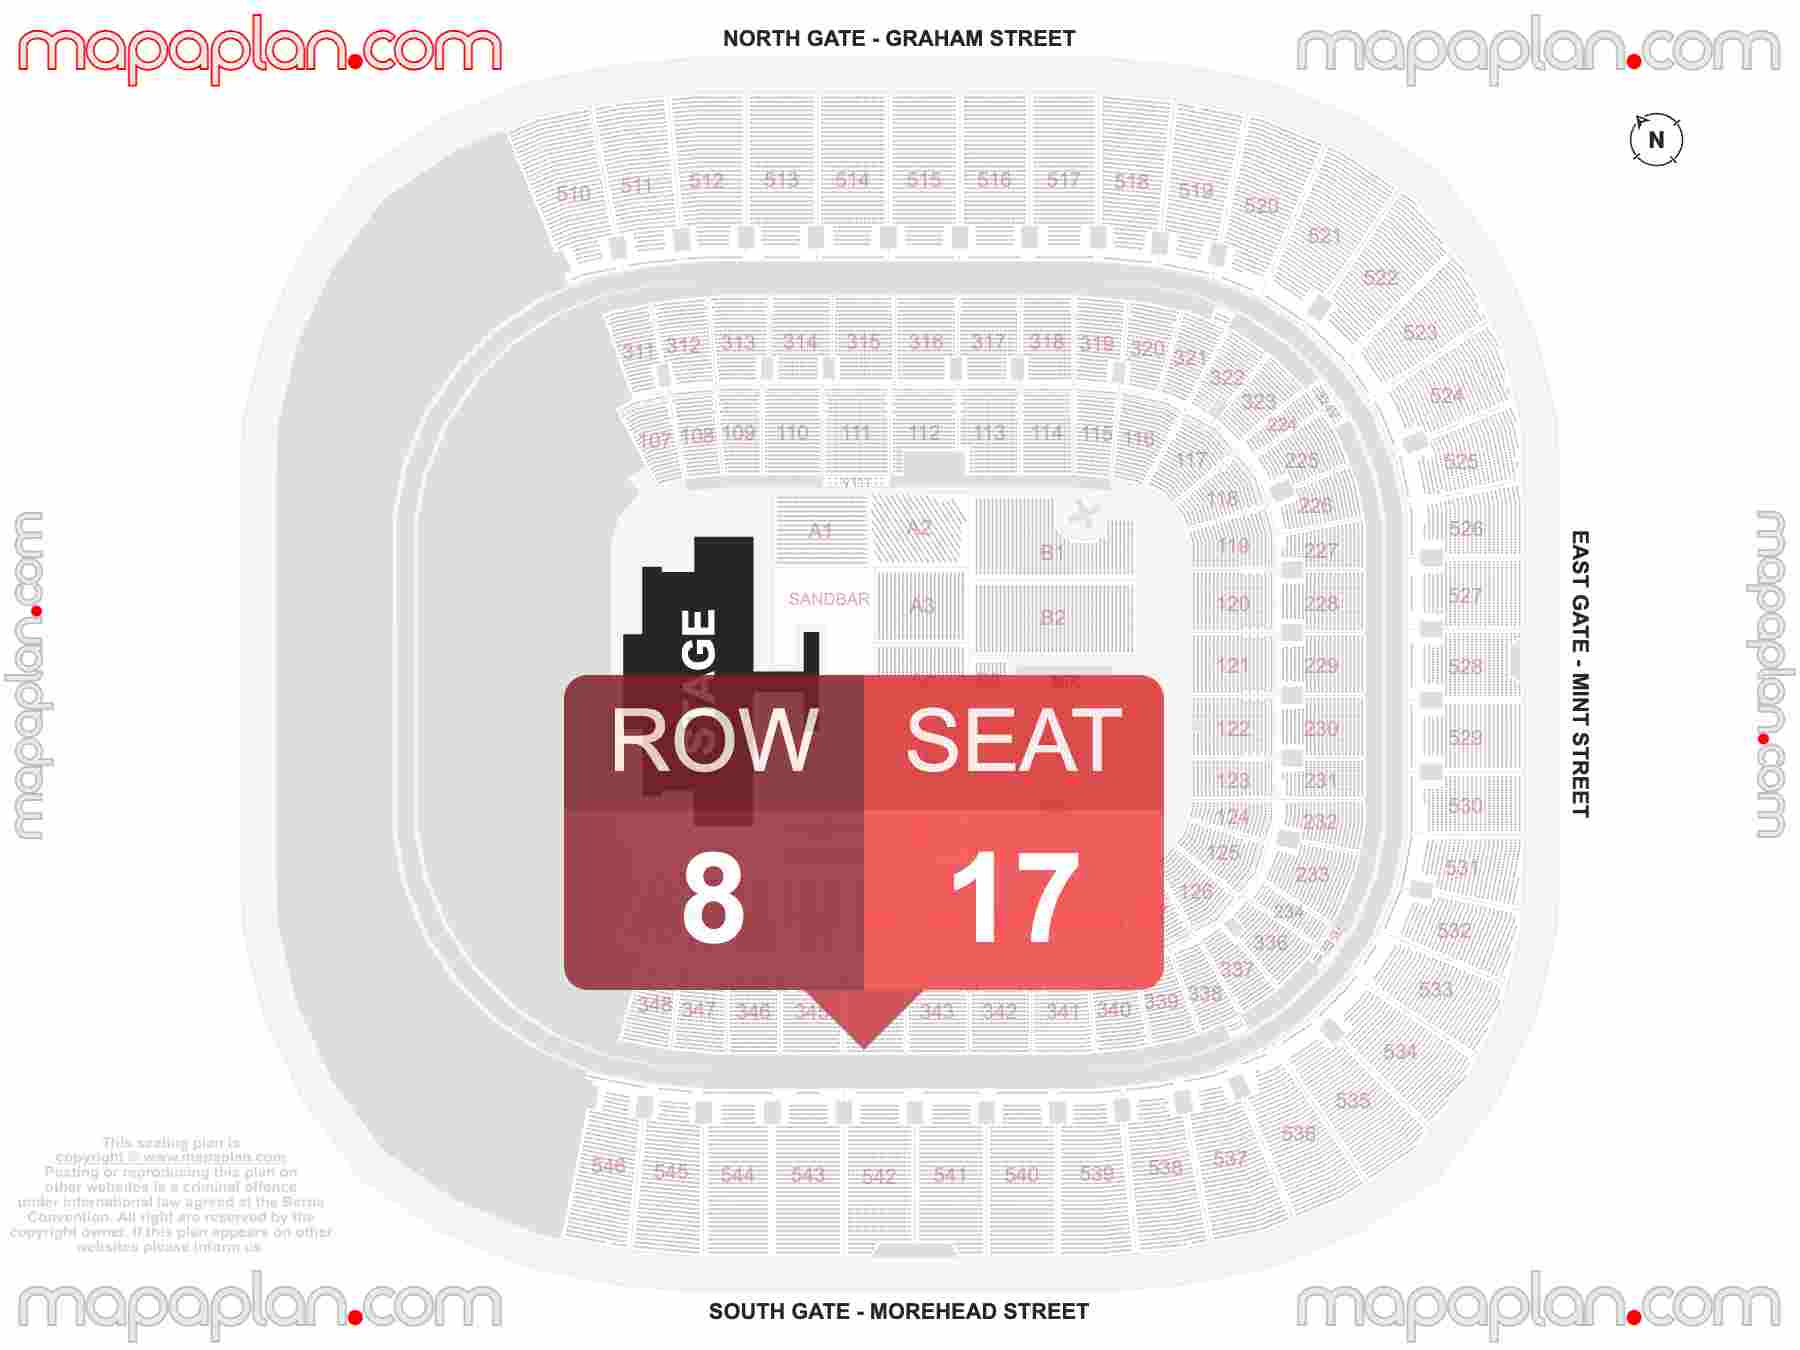 Charlotte Bank of America Stadium seating chart Concert with floor general admission PIT standing interactive seating checker map plan showing seat numbers per row - Ticket prices sections review diagram